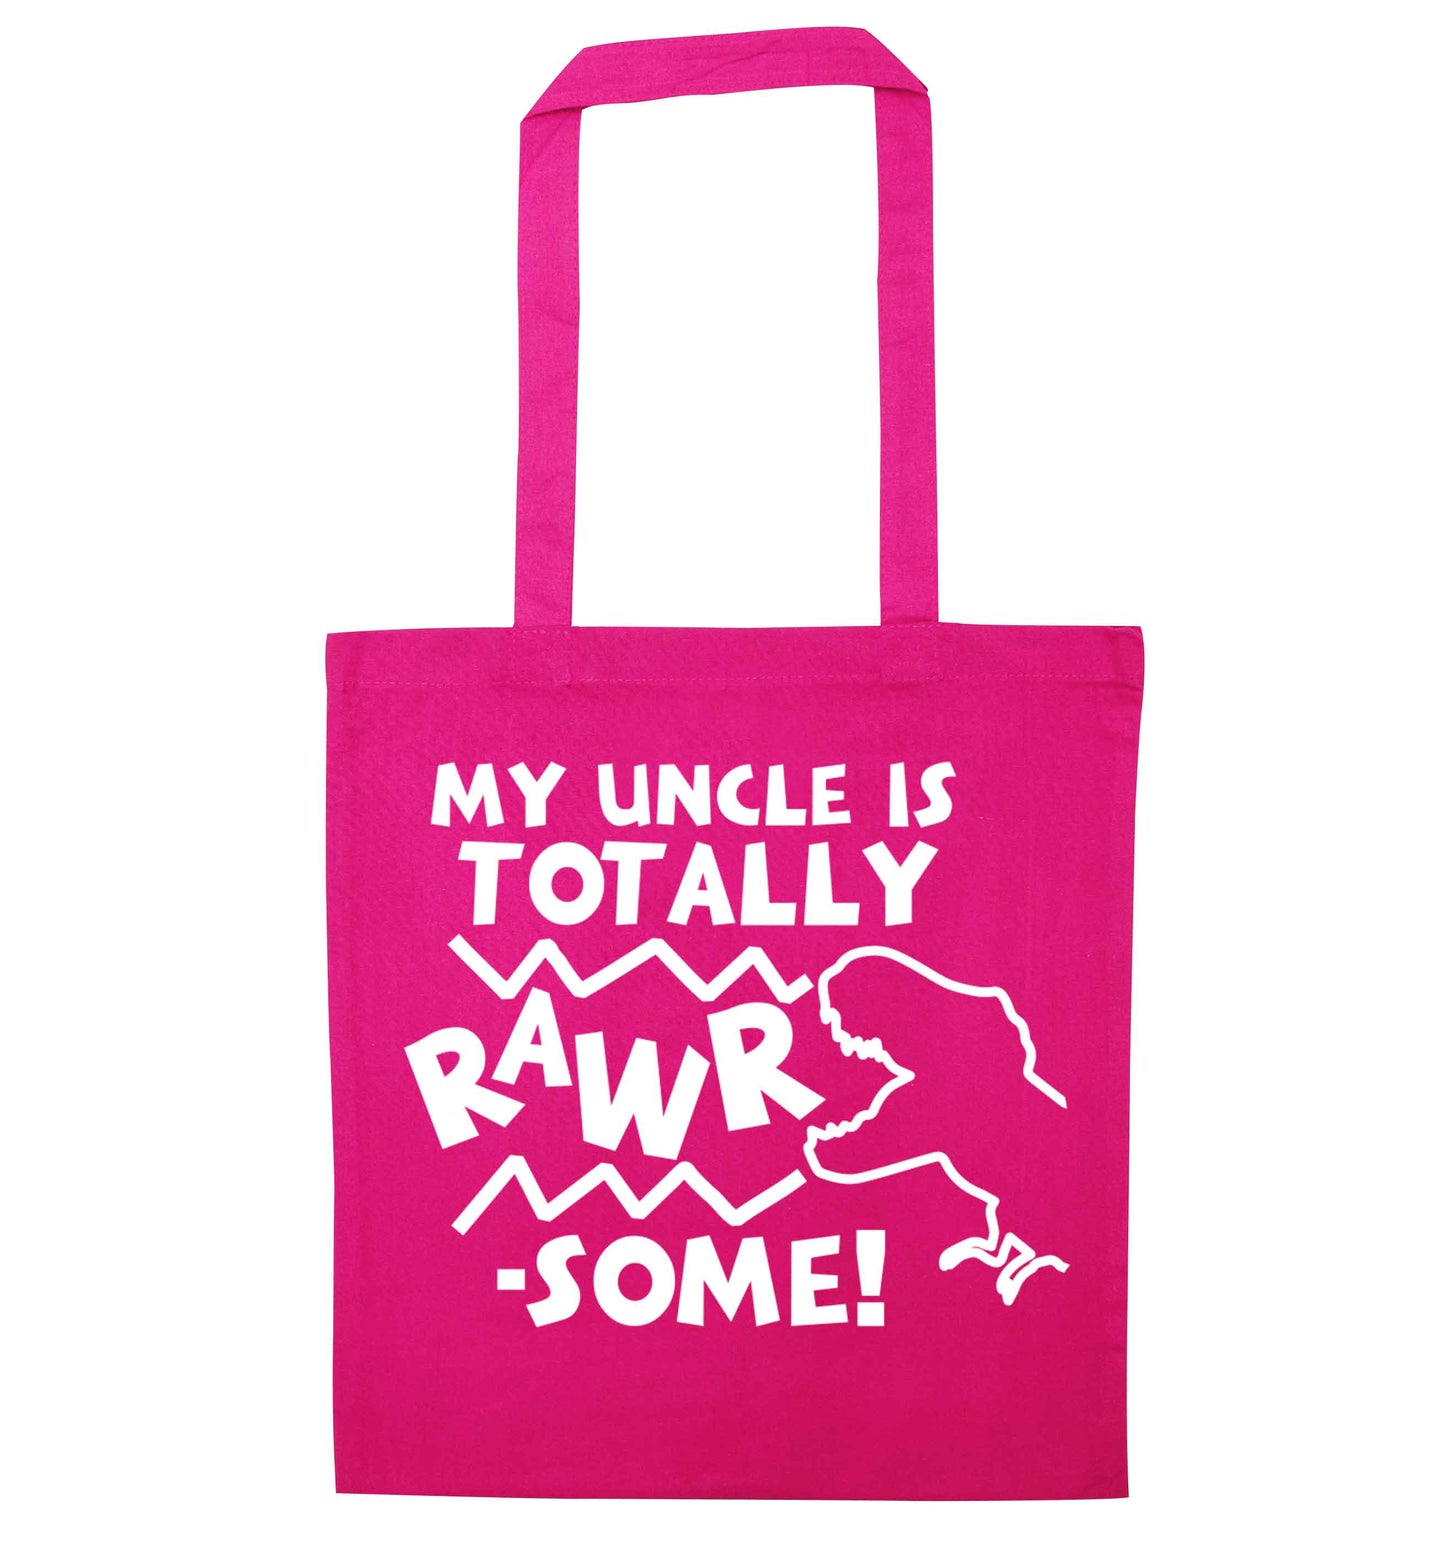 My uncle is totally rawrsome pink tote bag